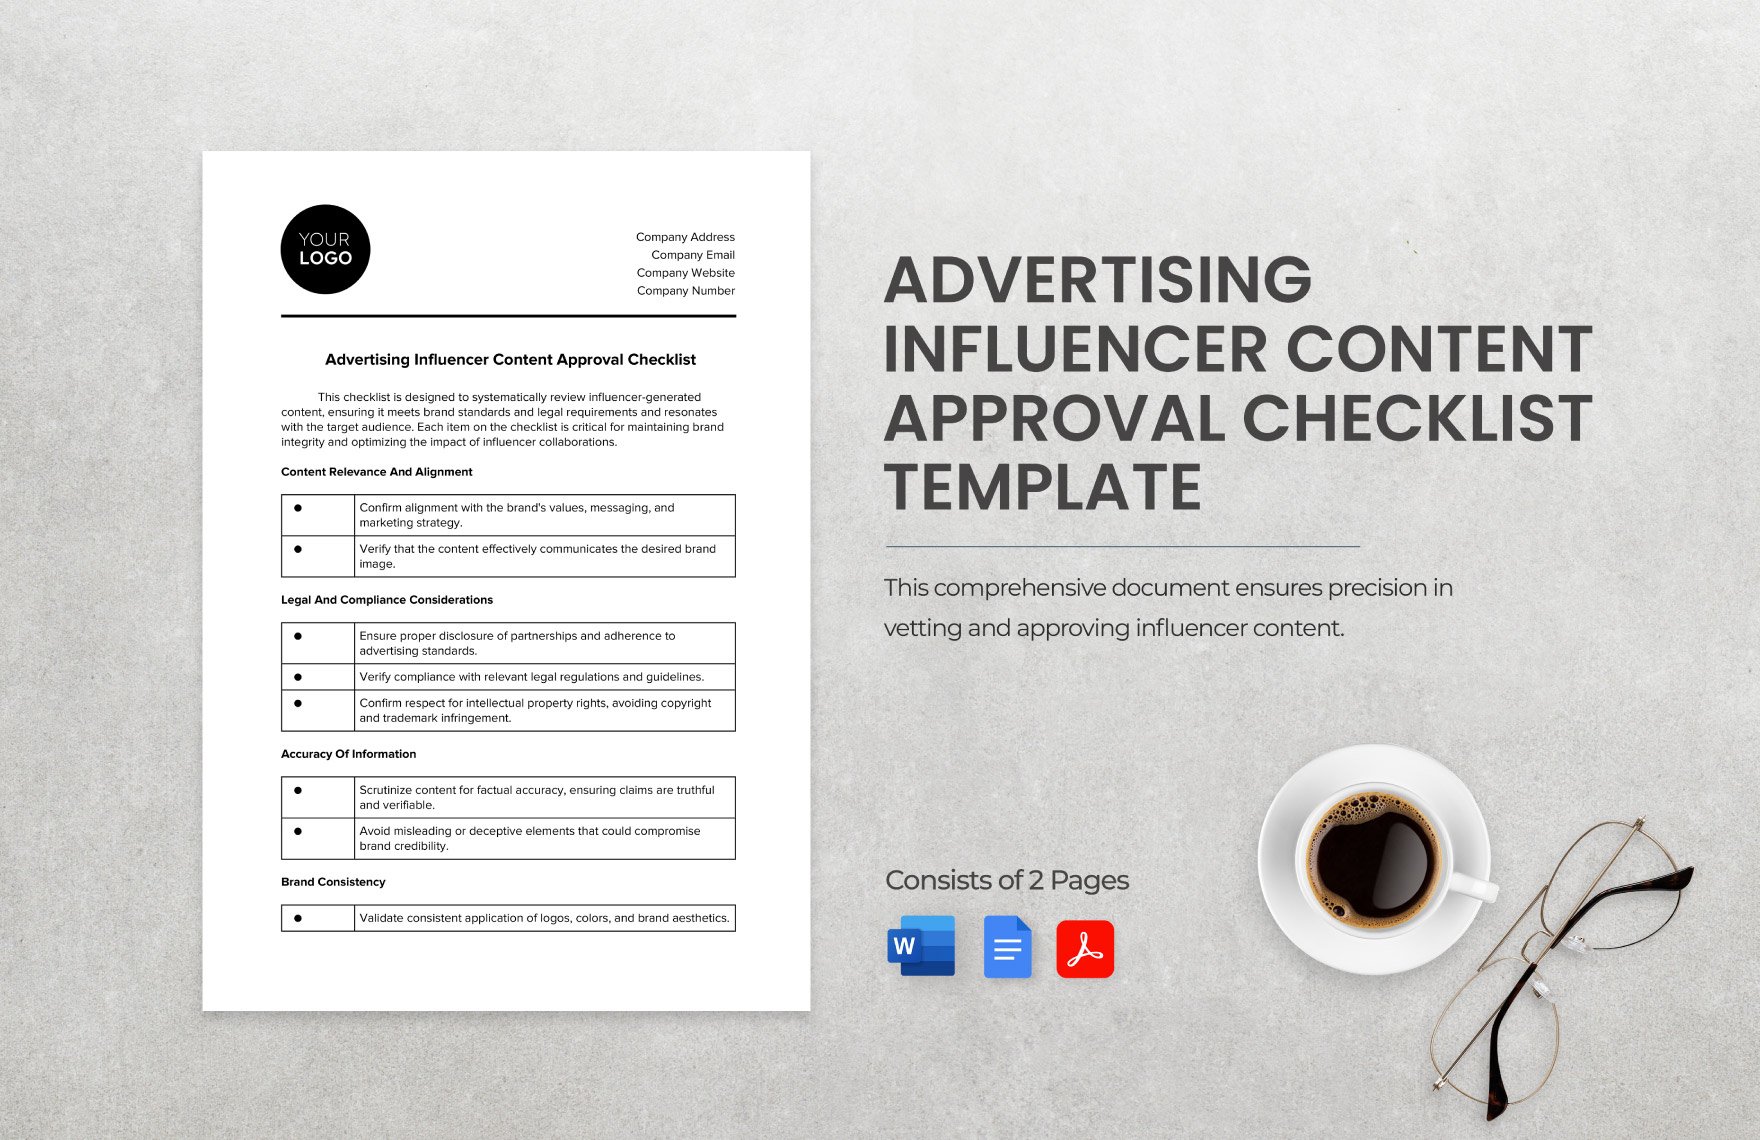 Advertising Influencer Content Approval Checklist Template in Word, Google Docs, PDF